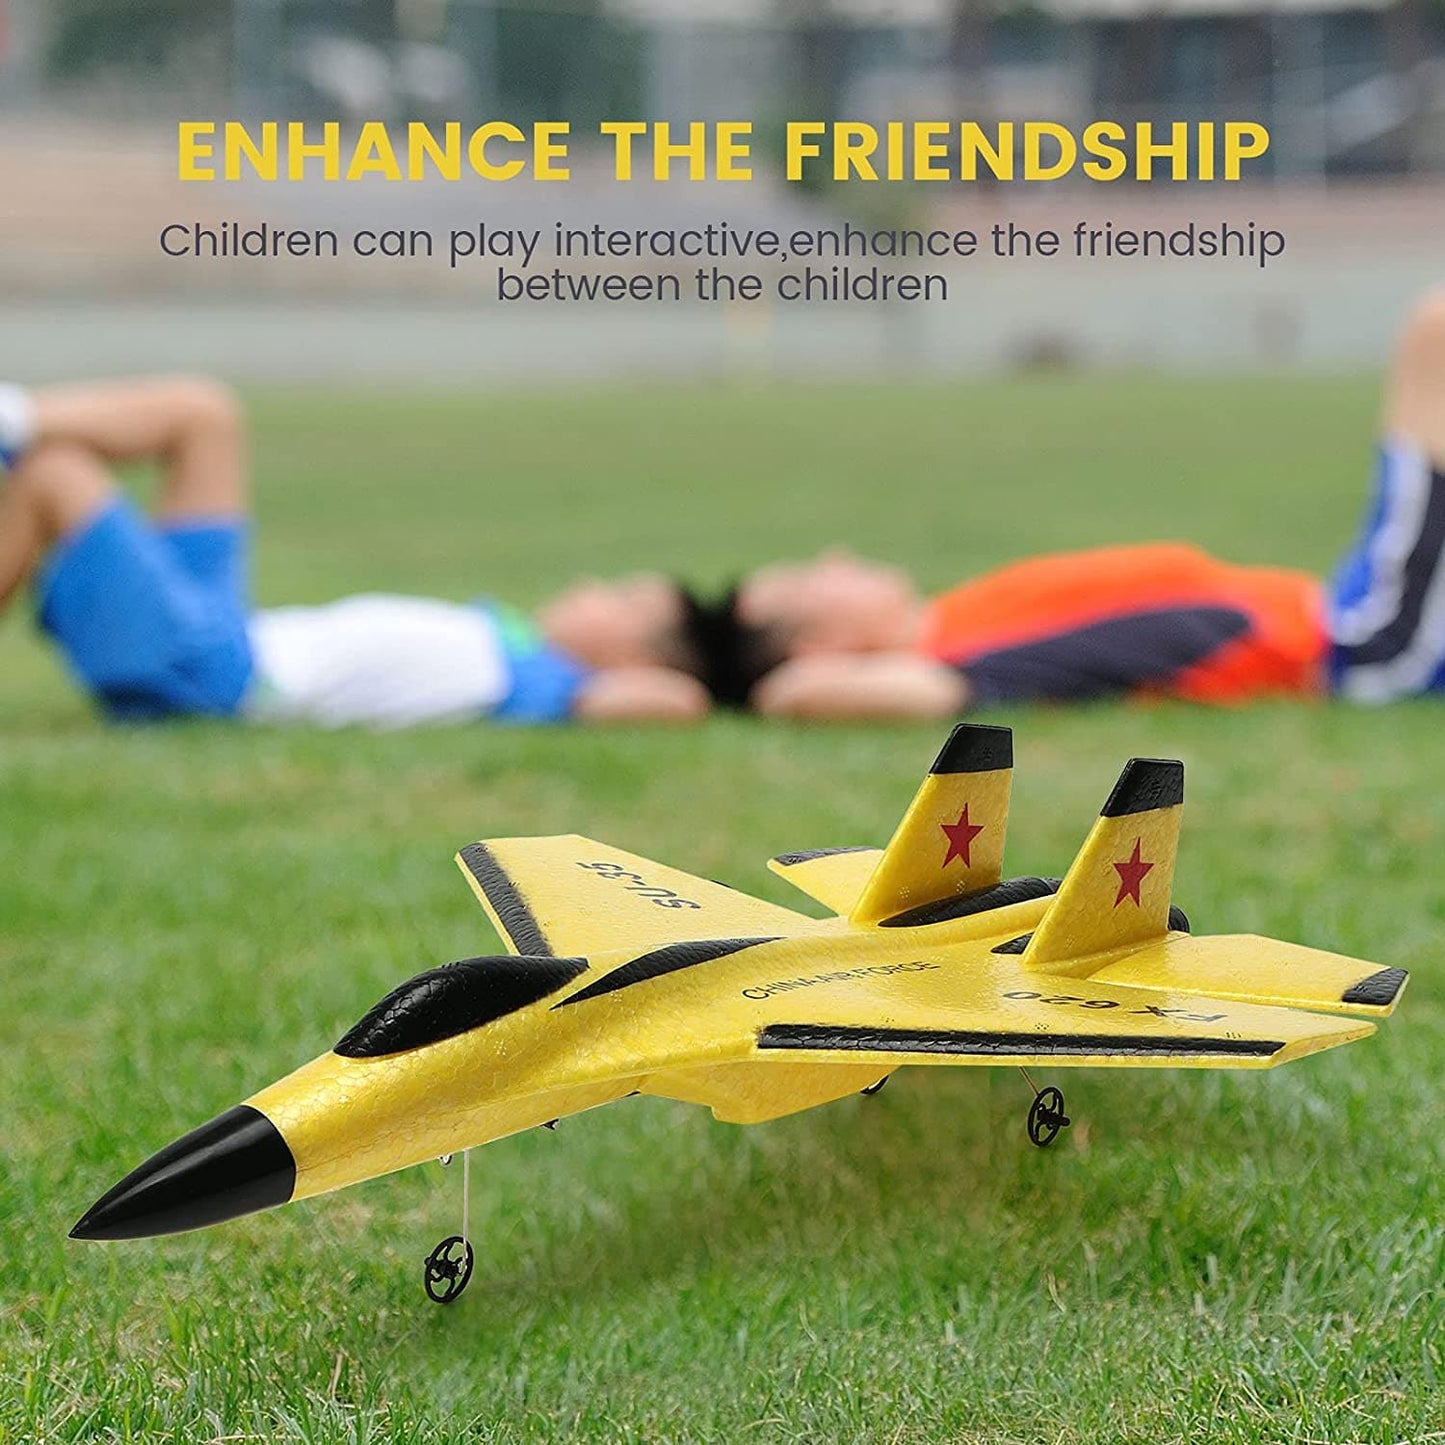 🔥Hot Sale ✨ UP TO 65% OFF🔥 RC Fighter Plane